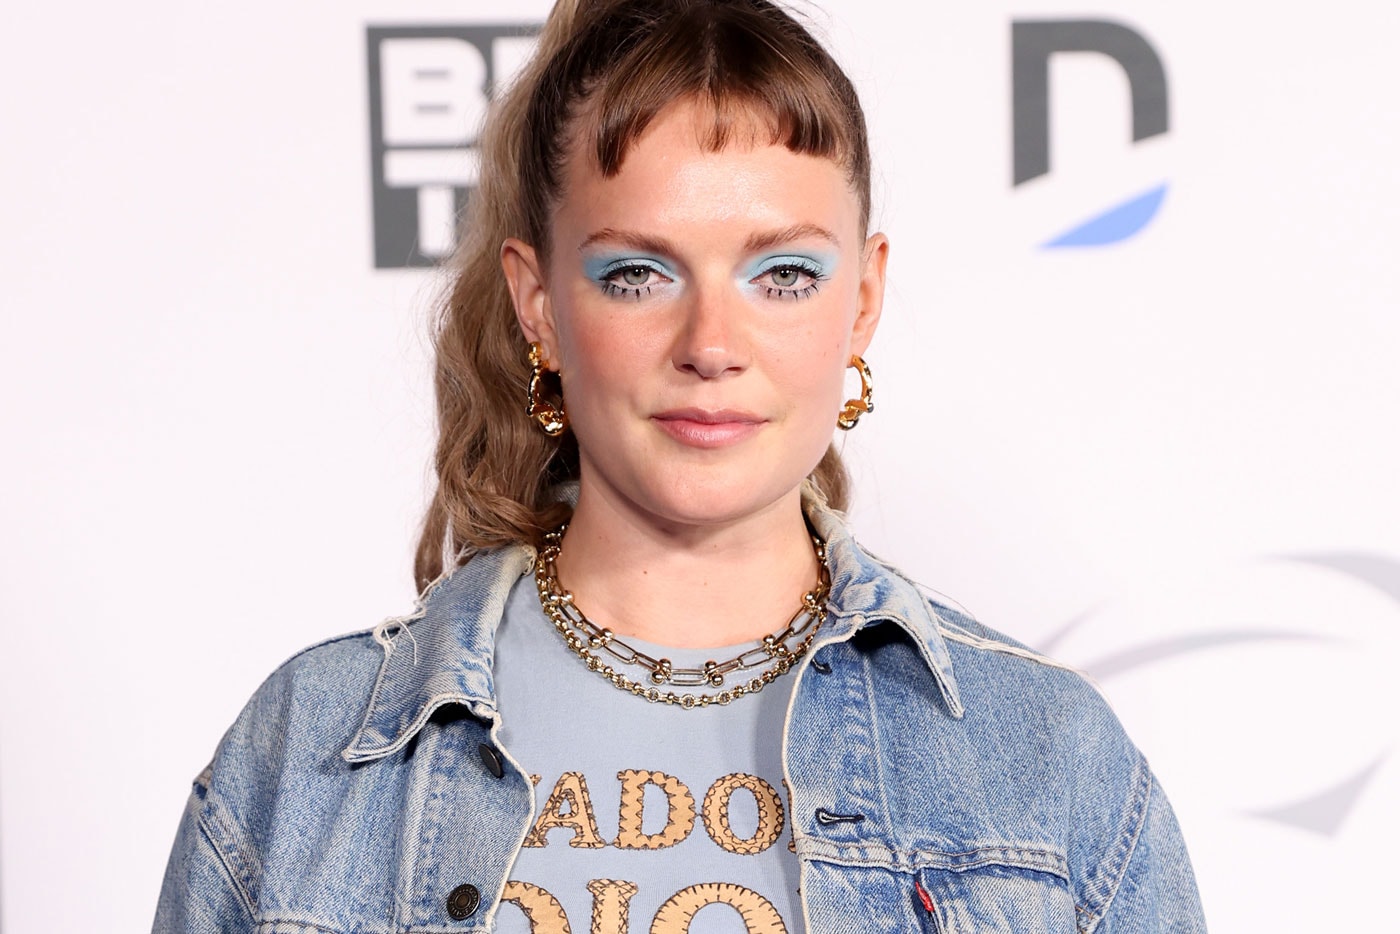 Tove Lo Previews Plans for 2016 With "Influence"